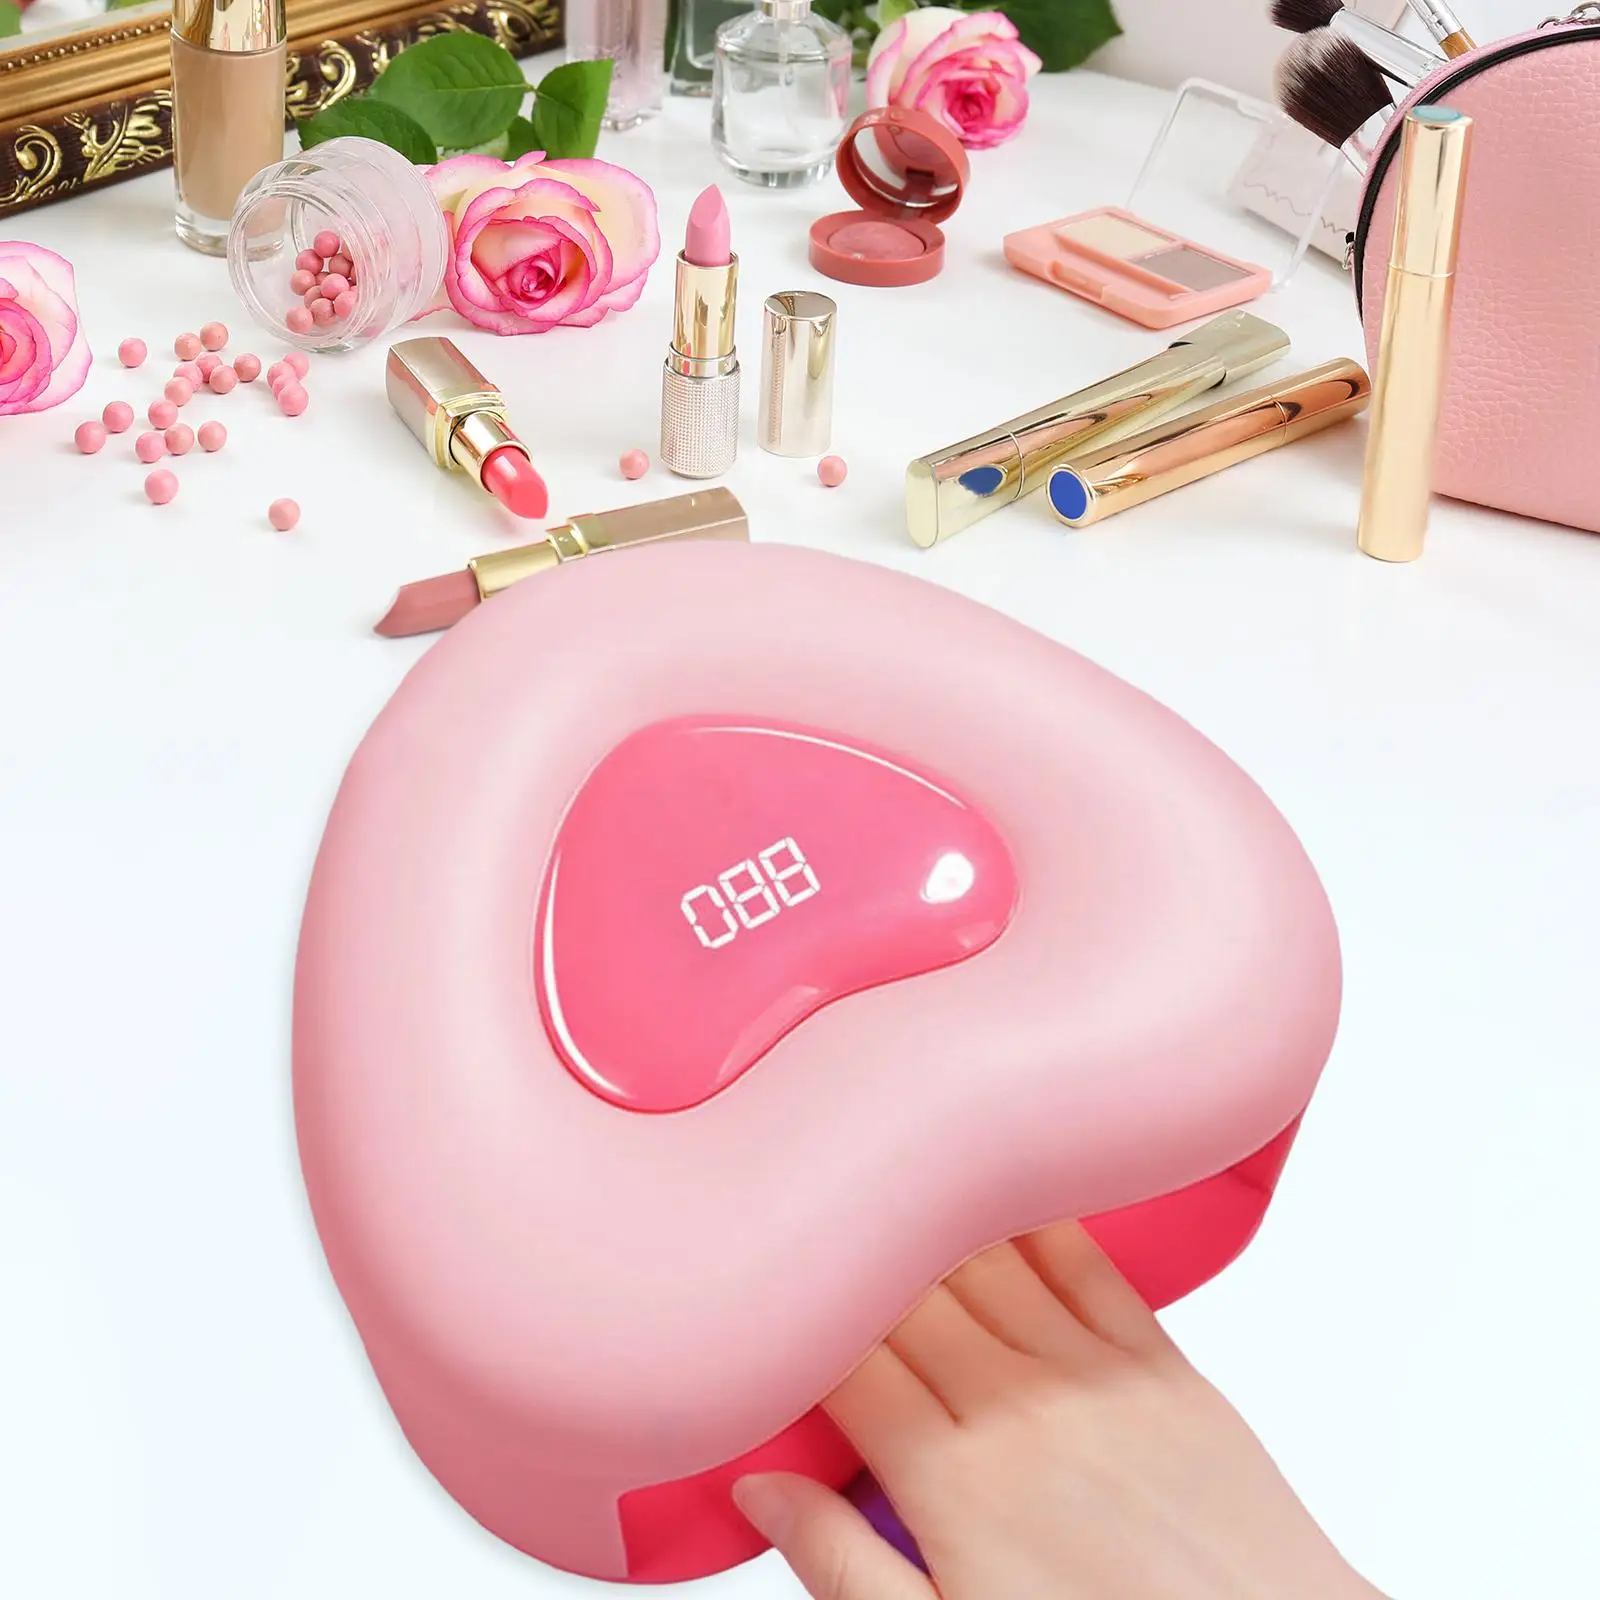 Mini LED Nail Lamp 280W Quick Drying 53Pcs Lamp Beads Nail Art Tools Manicure Pink Nail Dryer Machine for Home DIY Starters